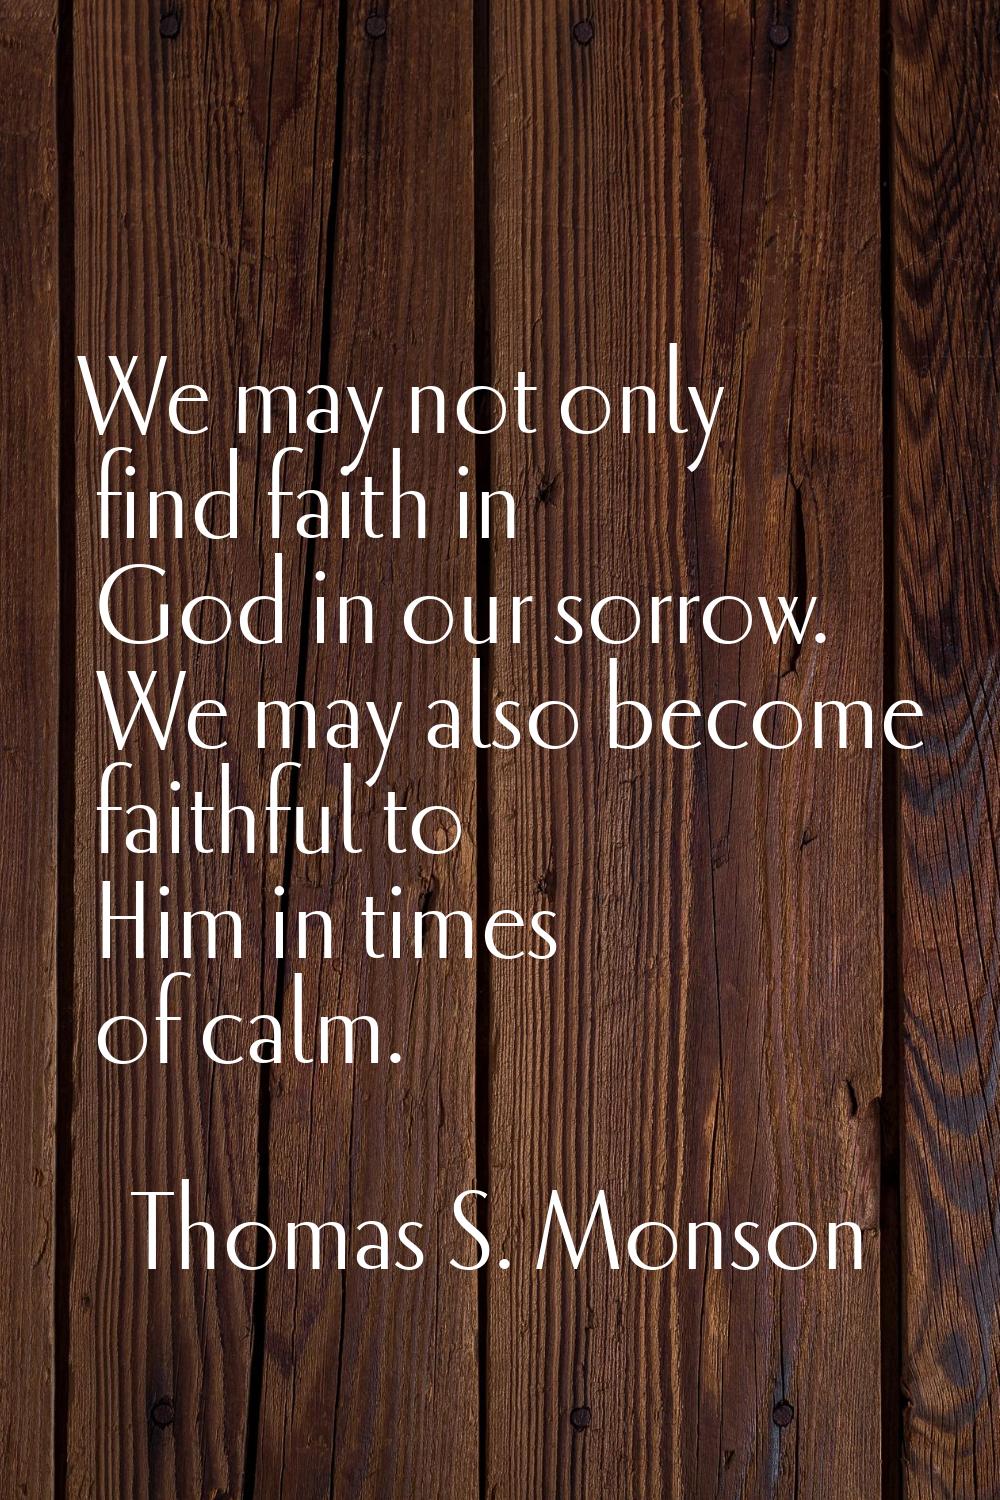 We may not only find faith in God in our sorrow. We may also become faithful to Him in times of cal